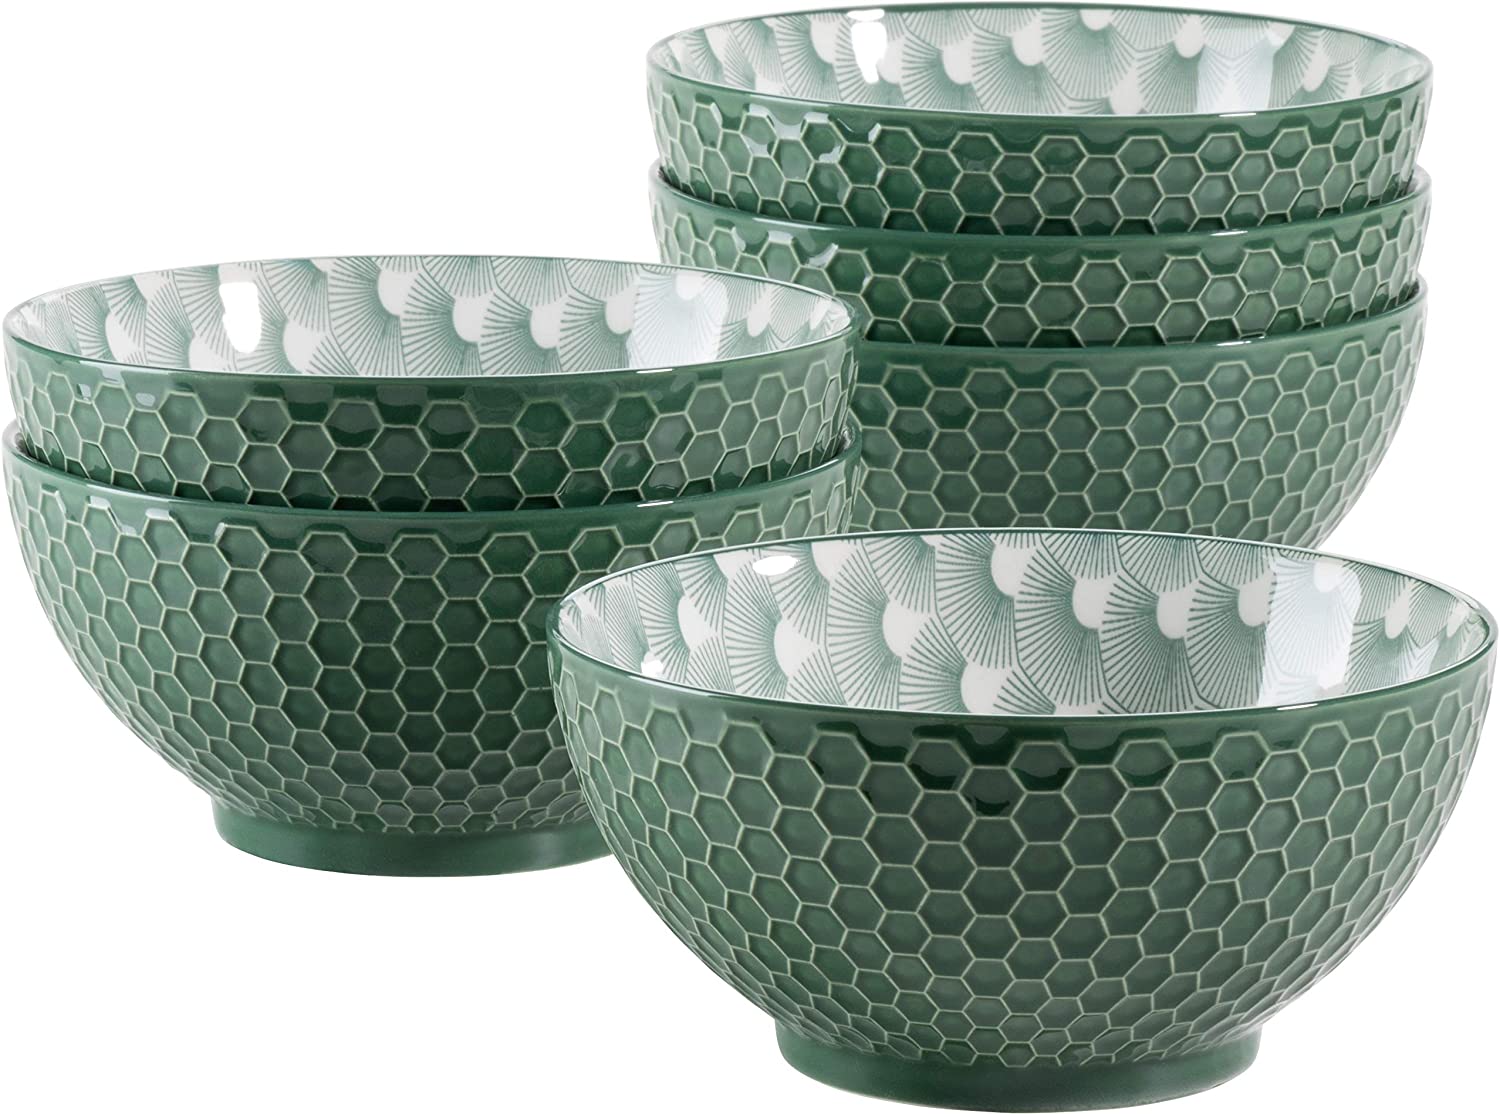 MÄSER 931578 Telde Series Cereal Bowls Set in Catering Quality, 6 Bowls with Pretty Relief Surface, Durable Porcelain, Green